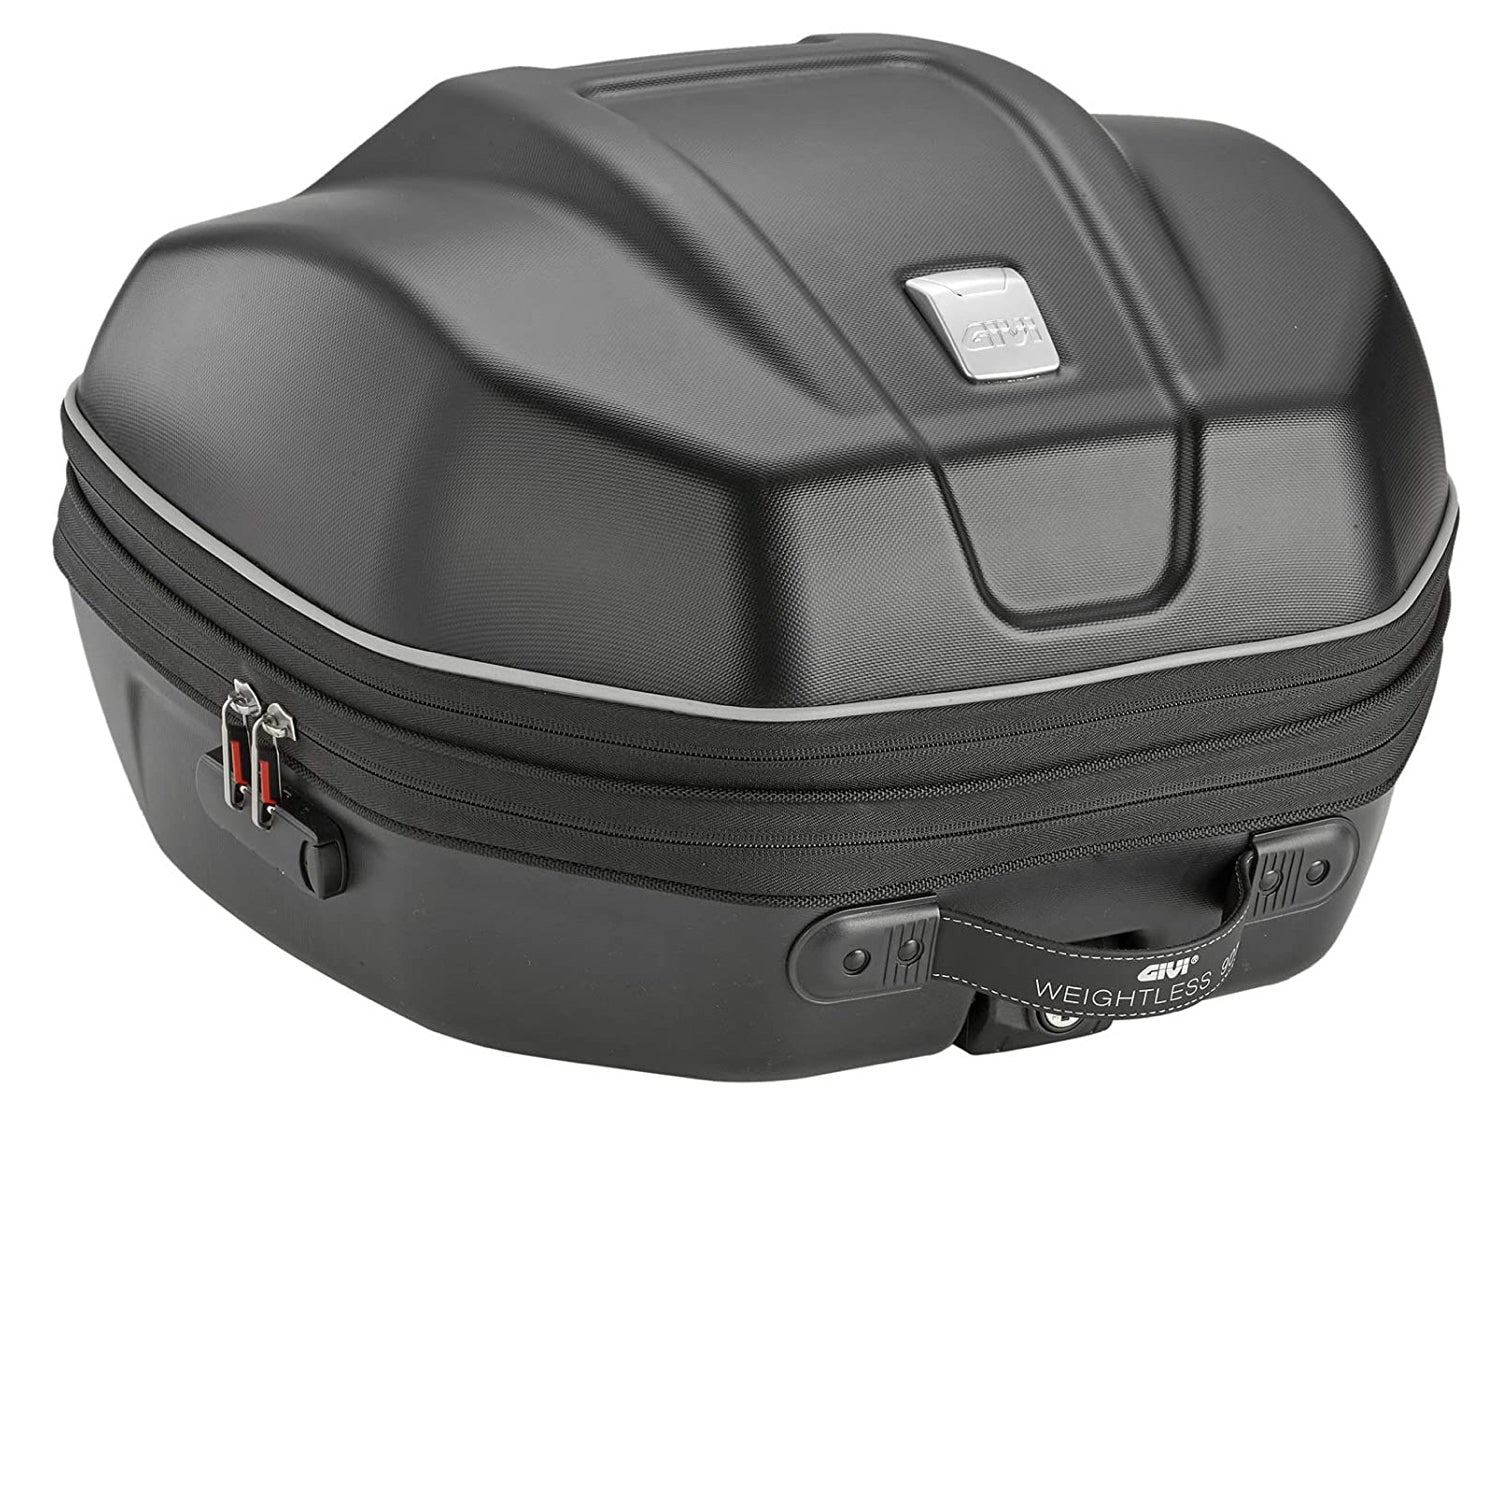 GIVI BAULETTO WL901 WEIGHTLESS COMPATIBILE CON KYMCO DOWNTOWN ABS 350 I 15/20